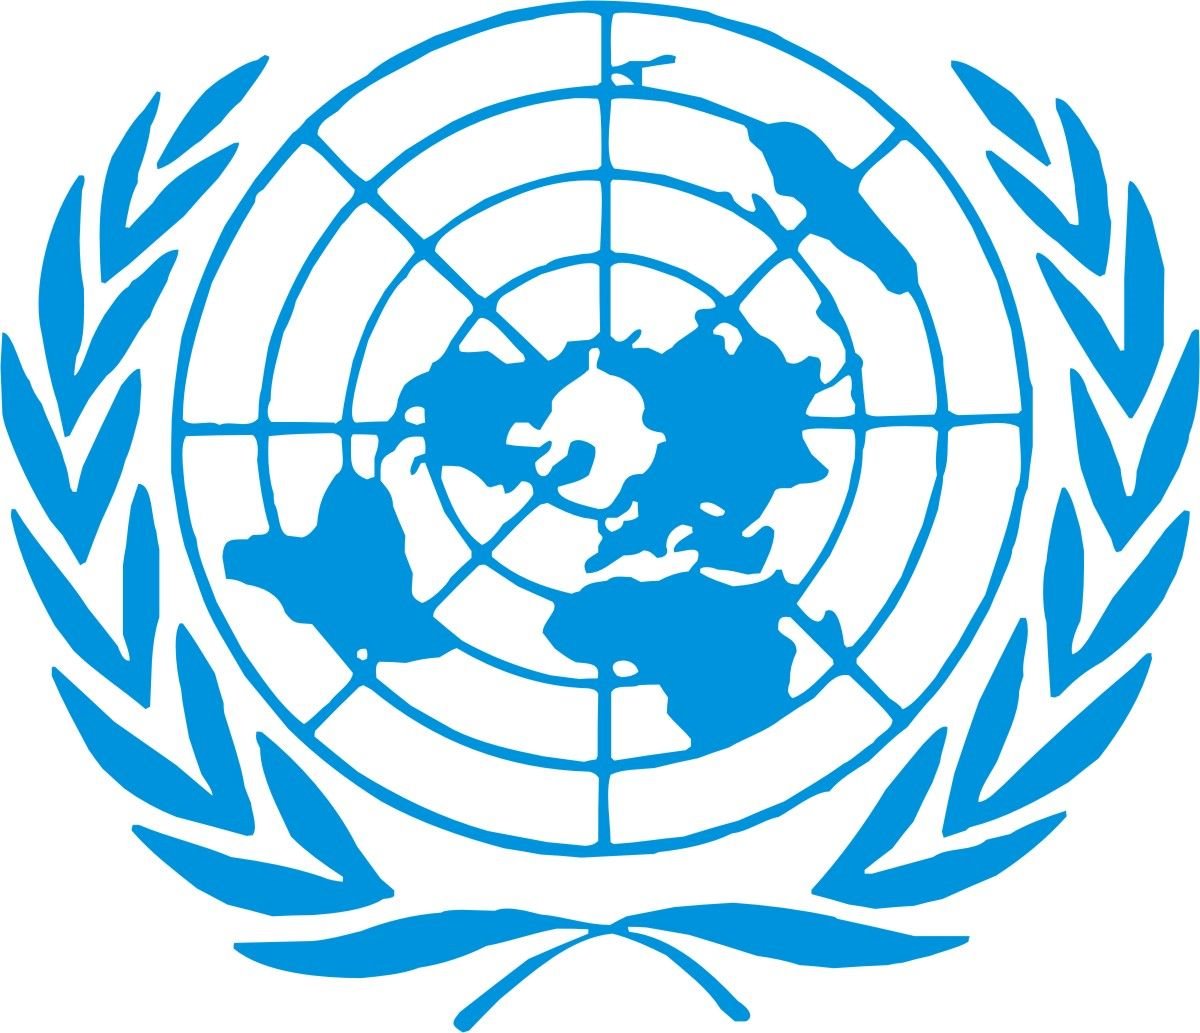 Supported by UN